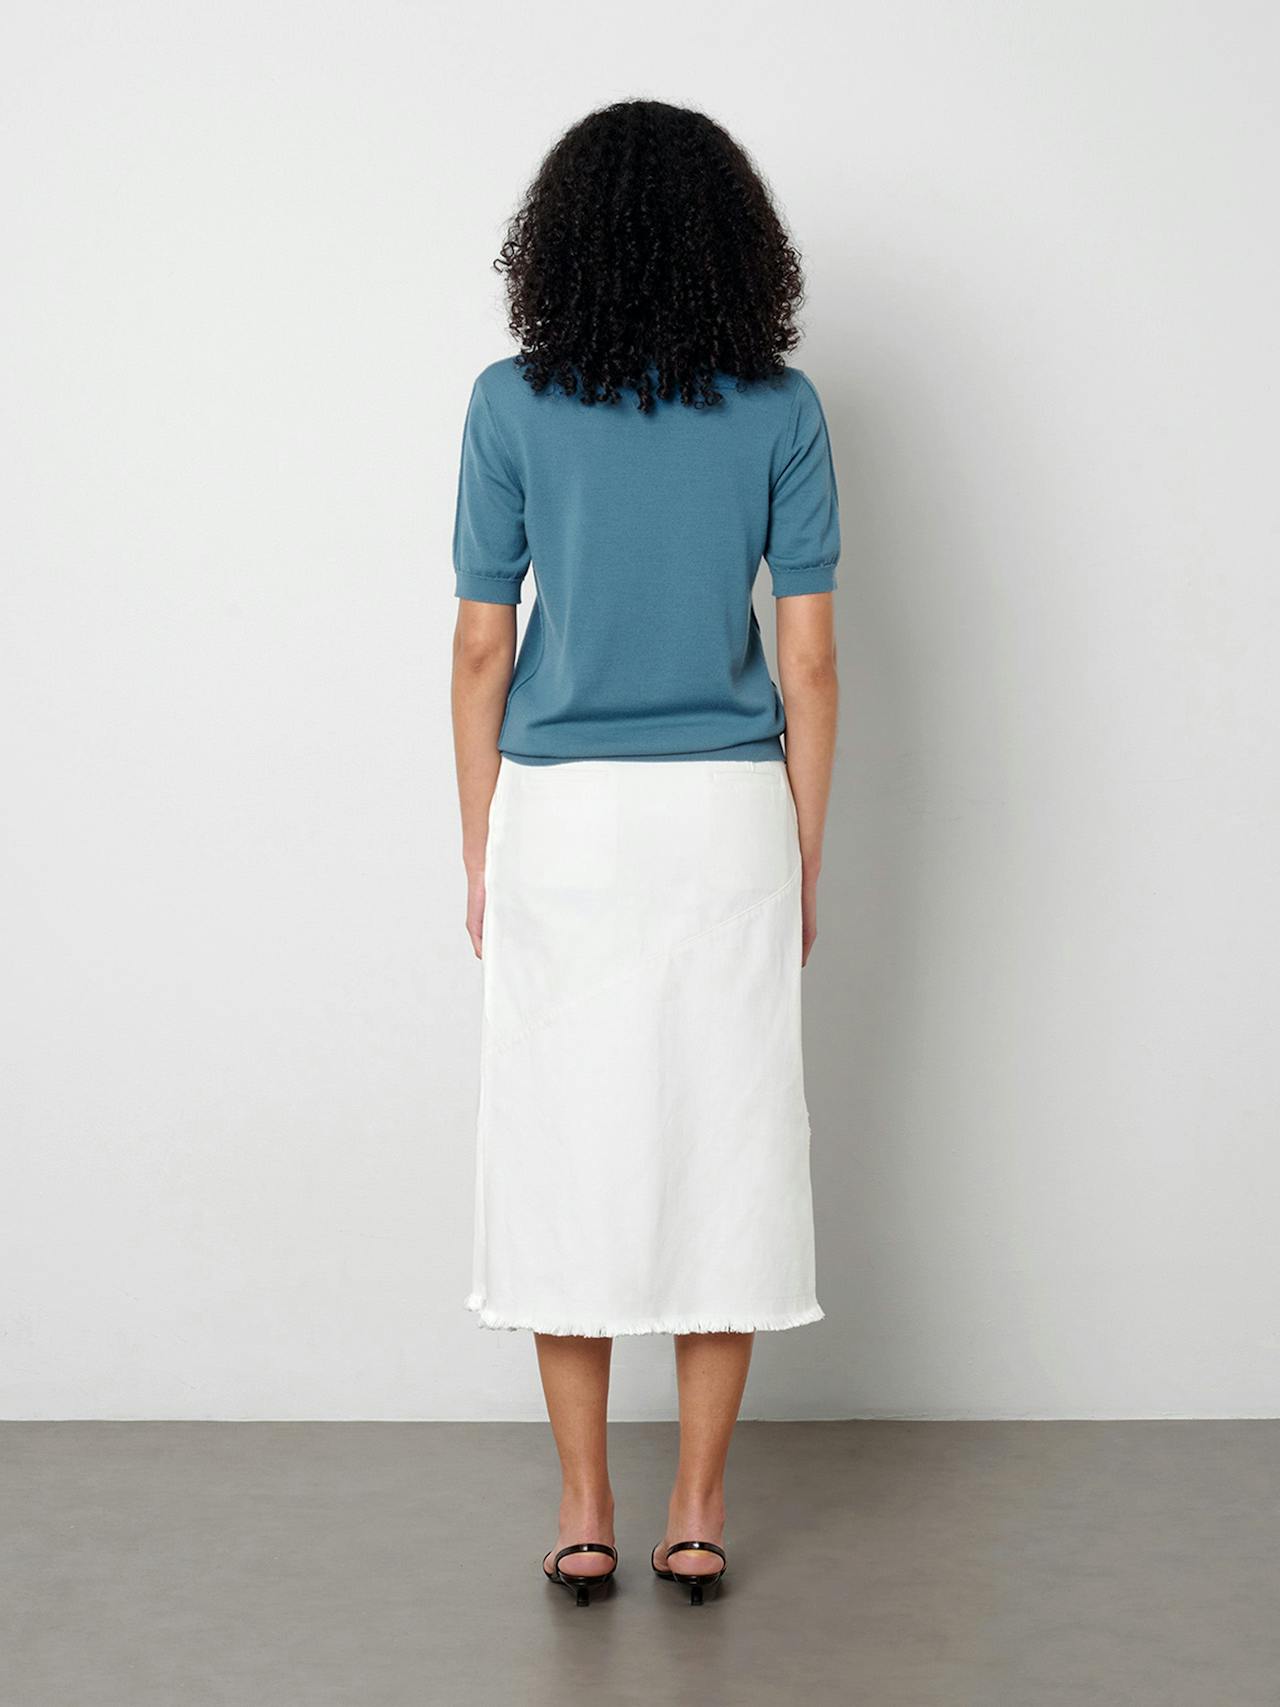 The Uma skirt softly skims the body and falls just below the knee. The crisp white denim is finished with a frayed edge detail at the waist and hem.